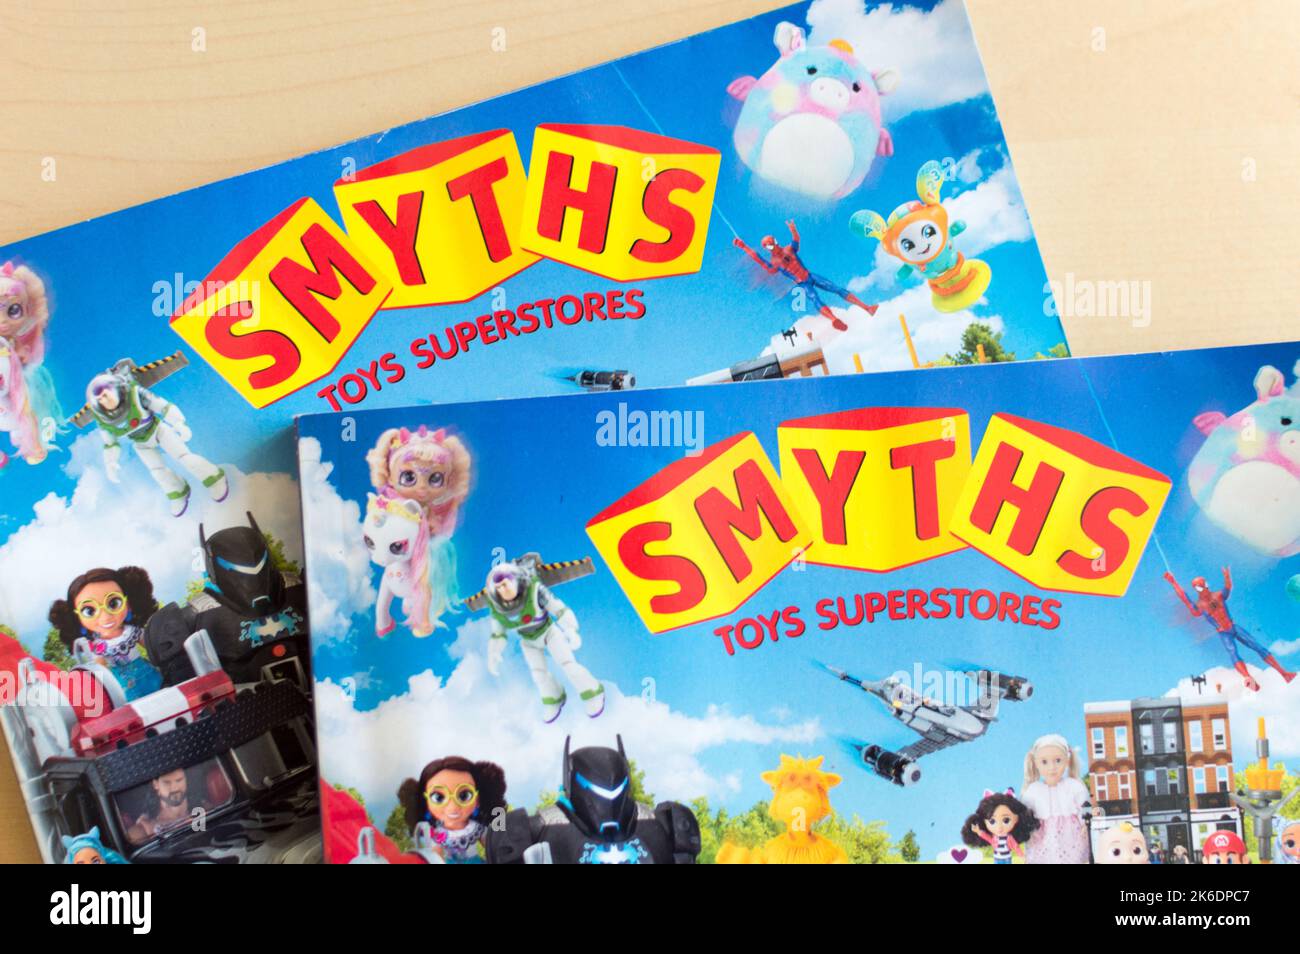 Smyths toys superstore catalogue printed book Stock Photo